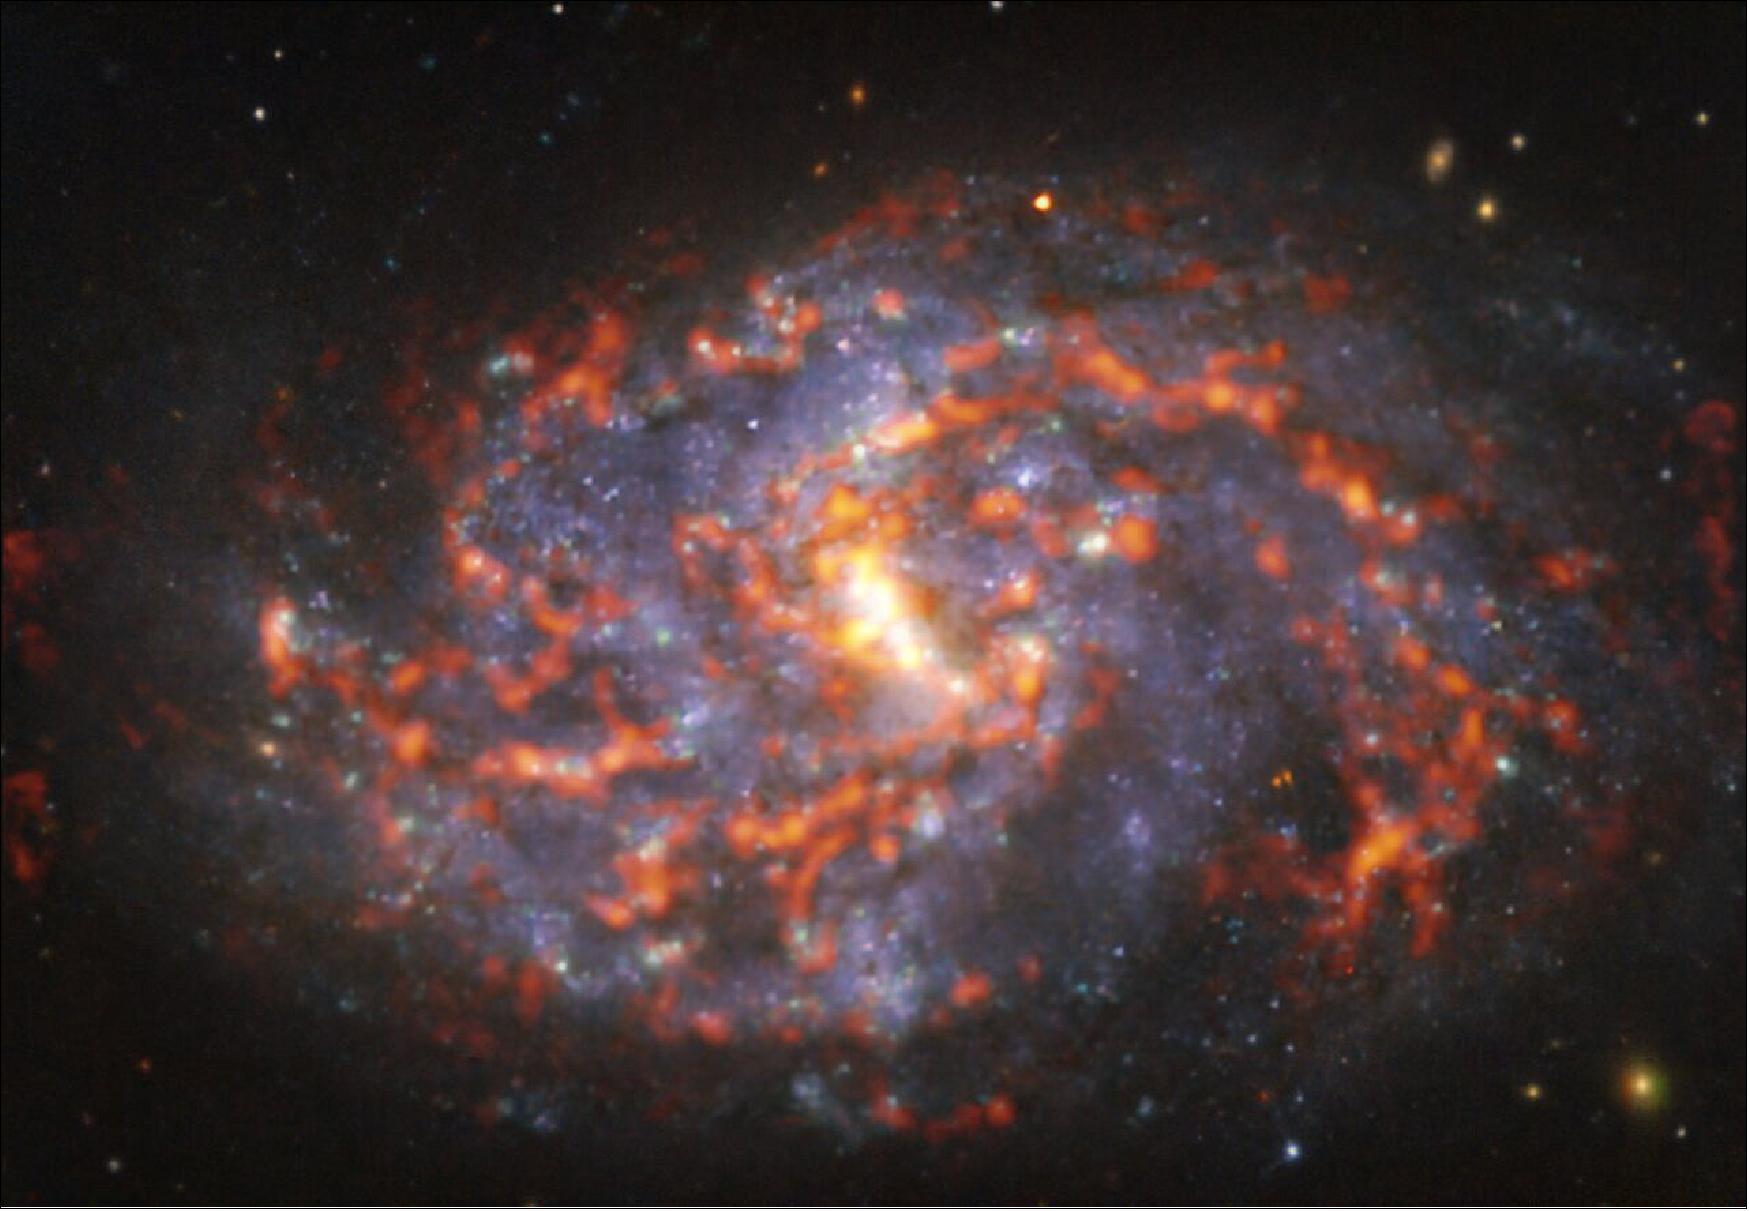 Figure 20: This image was taken as part of the Physics at High Angular resolution in Nearby GalaxieS (PHANGS) project. The team is making high-resolution observations of nearby galaxies with telescopes operating across a wide range of wavelengths. Different wavelengths tell us about the physical properties of stars, gas and dust within galaxies, and by comparing them astronomers are able to study what activates, boosts or hinders the birth of new stars (image credit: ESO/ALMA (ESO/NAOJ/NRAO)/PHANGS)